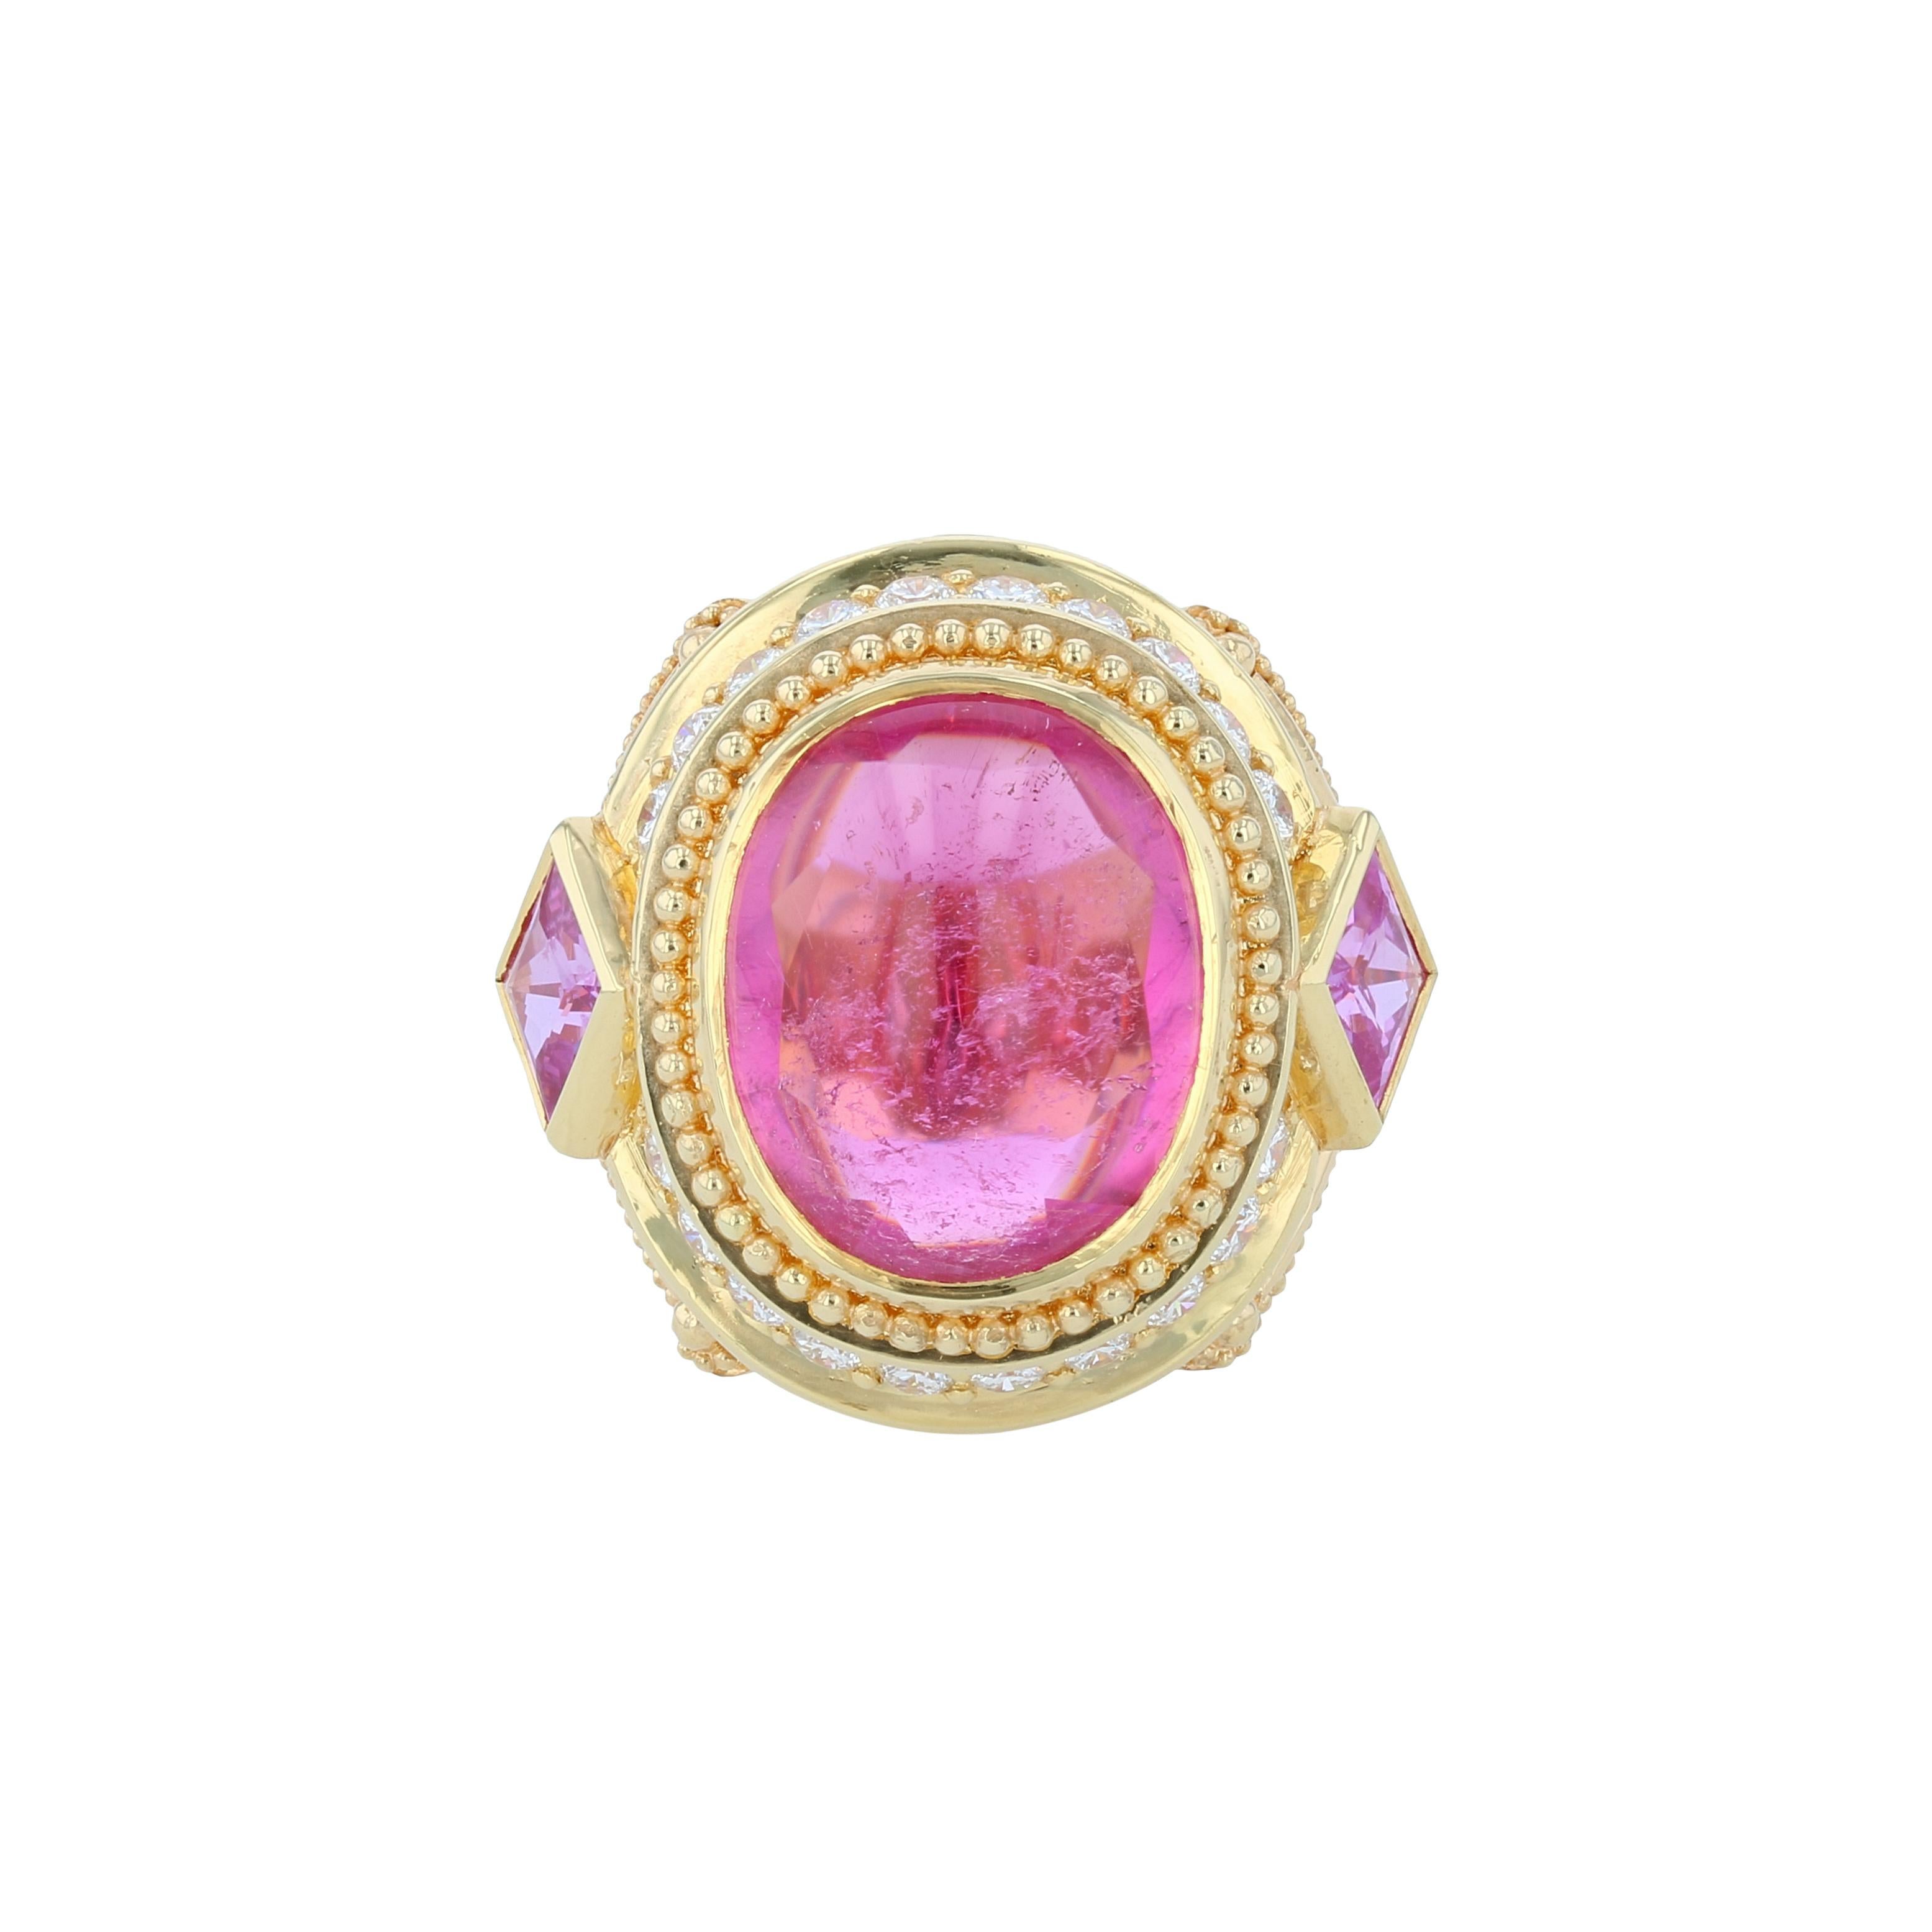 From the Kent Raible one of a kind 'Masterworks' collection, we bring you this stunning hand fabricated jewel, 'Rubellite Crown Ring'.
This is a classic Raible. Embellished with 18K gold granulation, and elegant detailing, the seven carat Rubellite